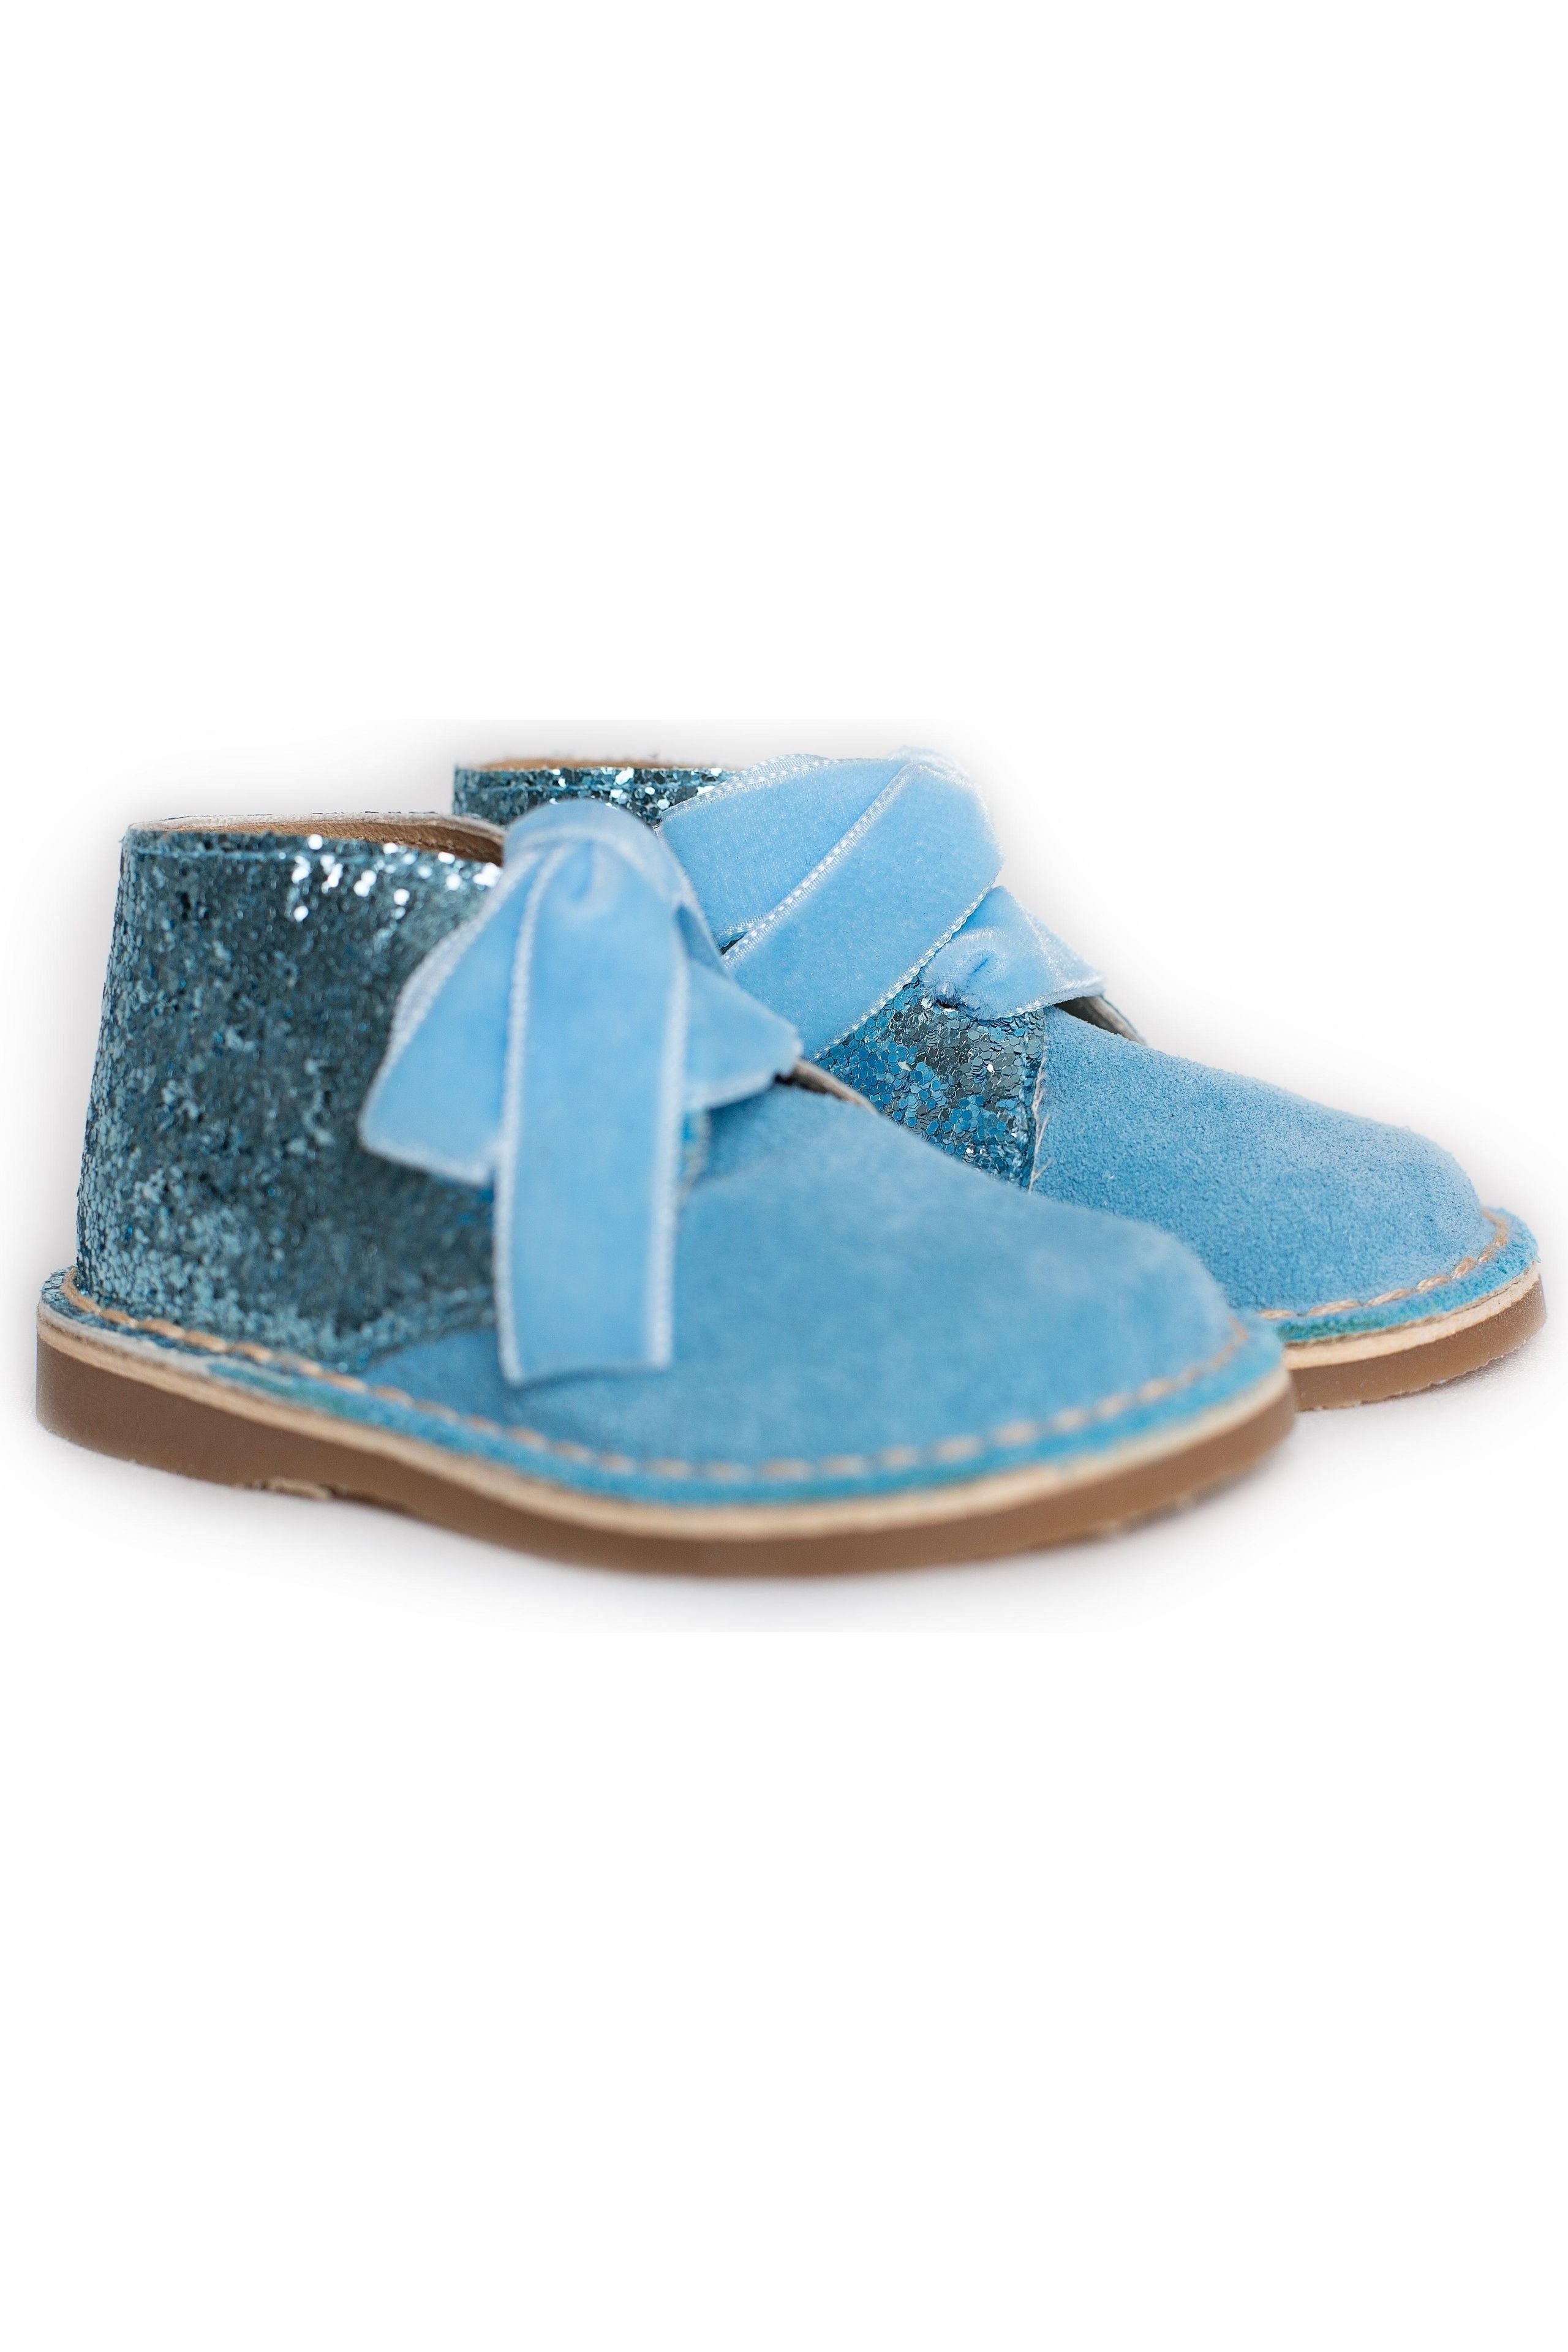 Rochy Blue Glitter Boots NON RETURNABLE Dainty Delilah 